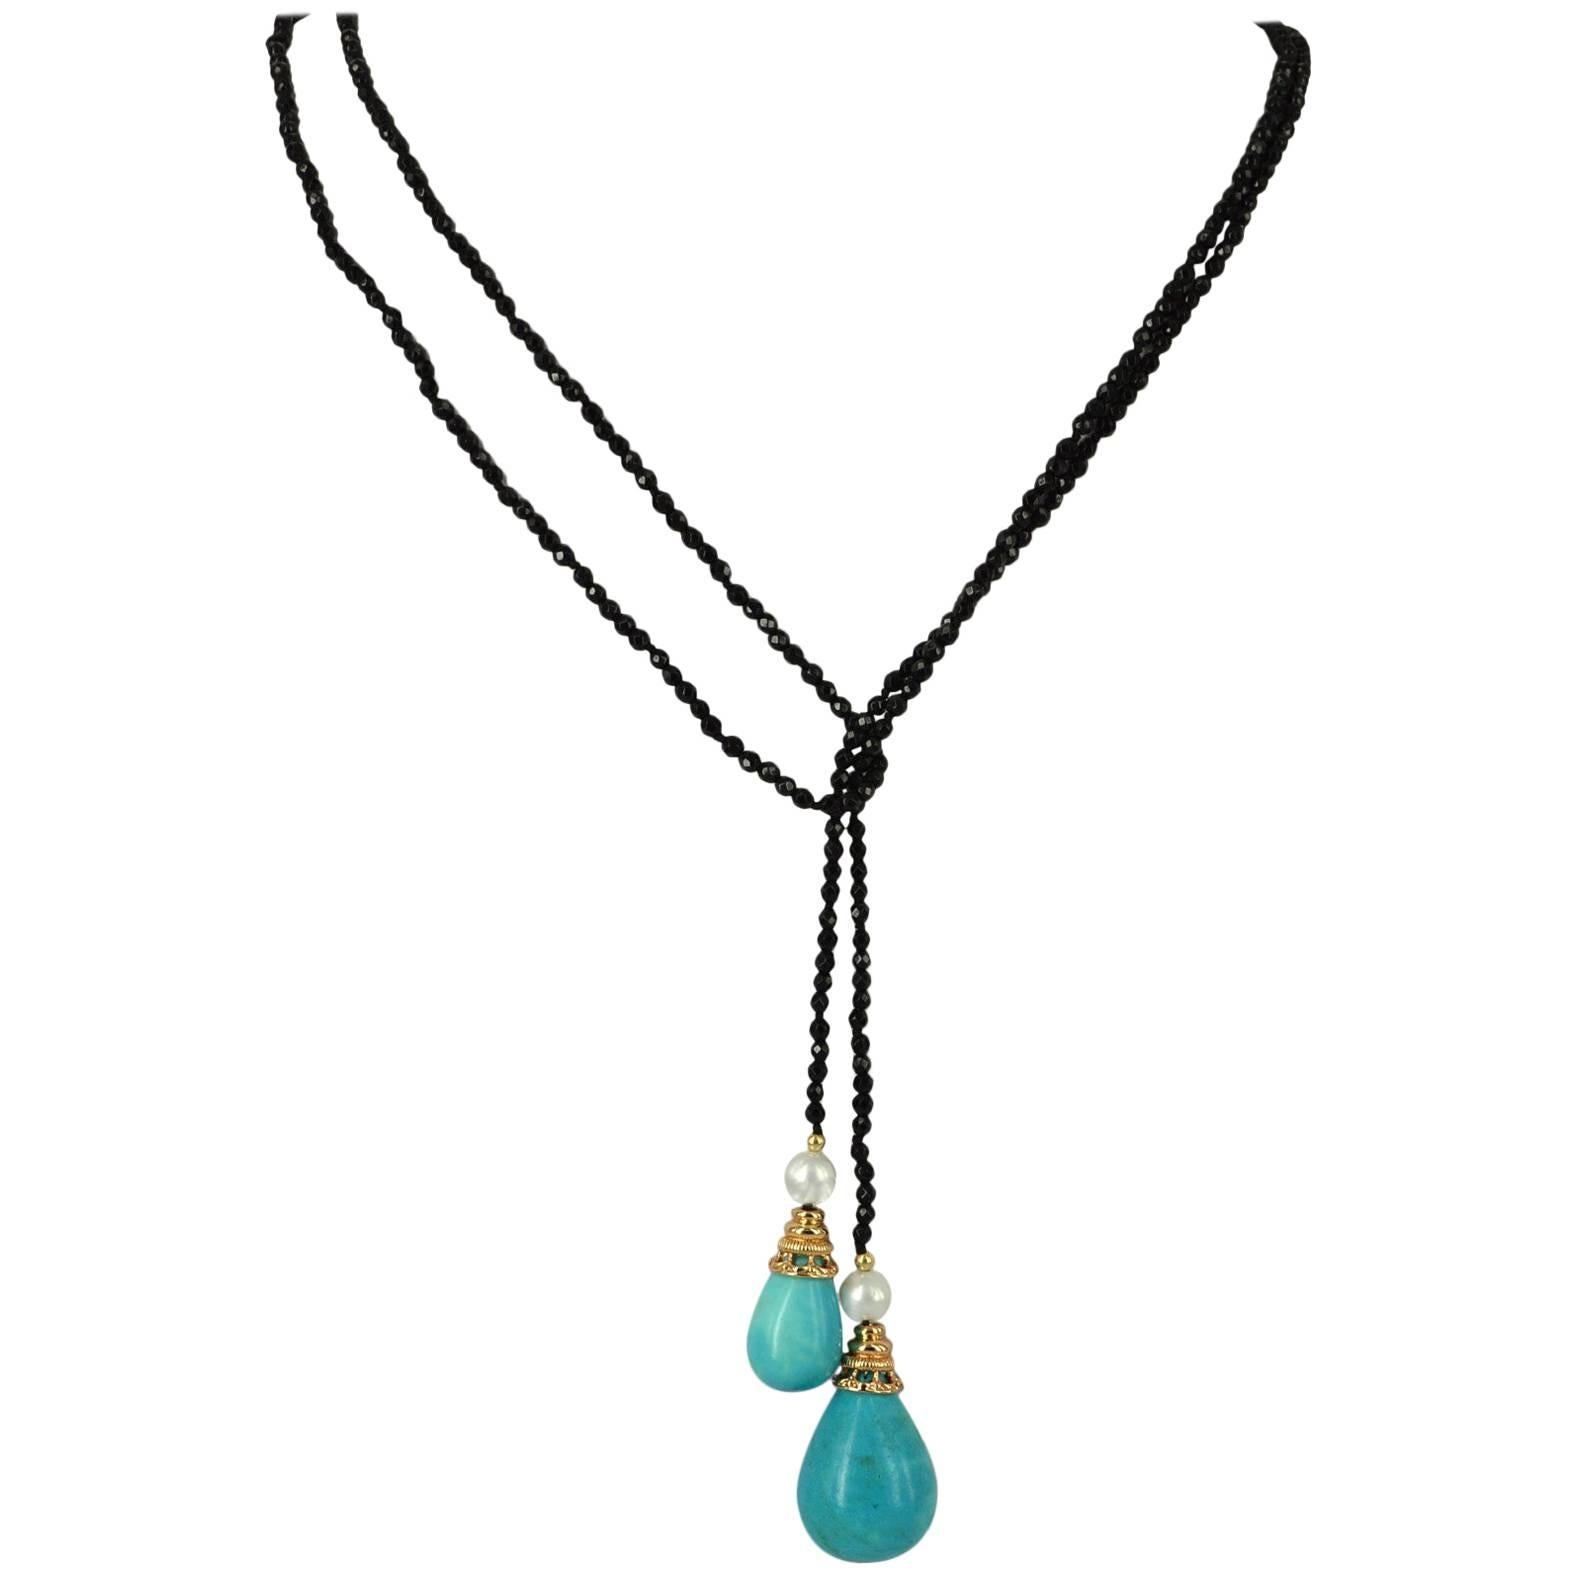 Decadent Jewels Turquoise Onyx Pearl Gold Lariet Necklace For Sale